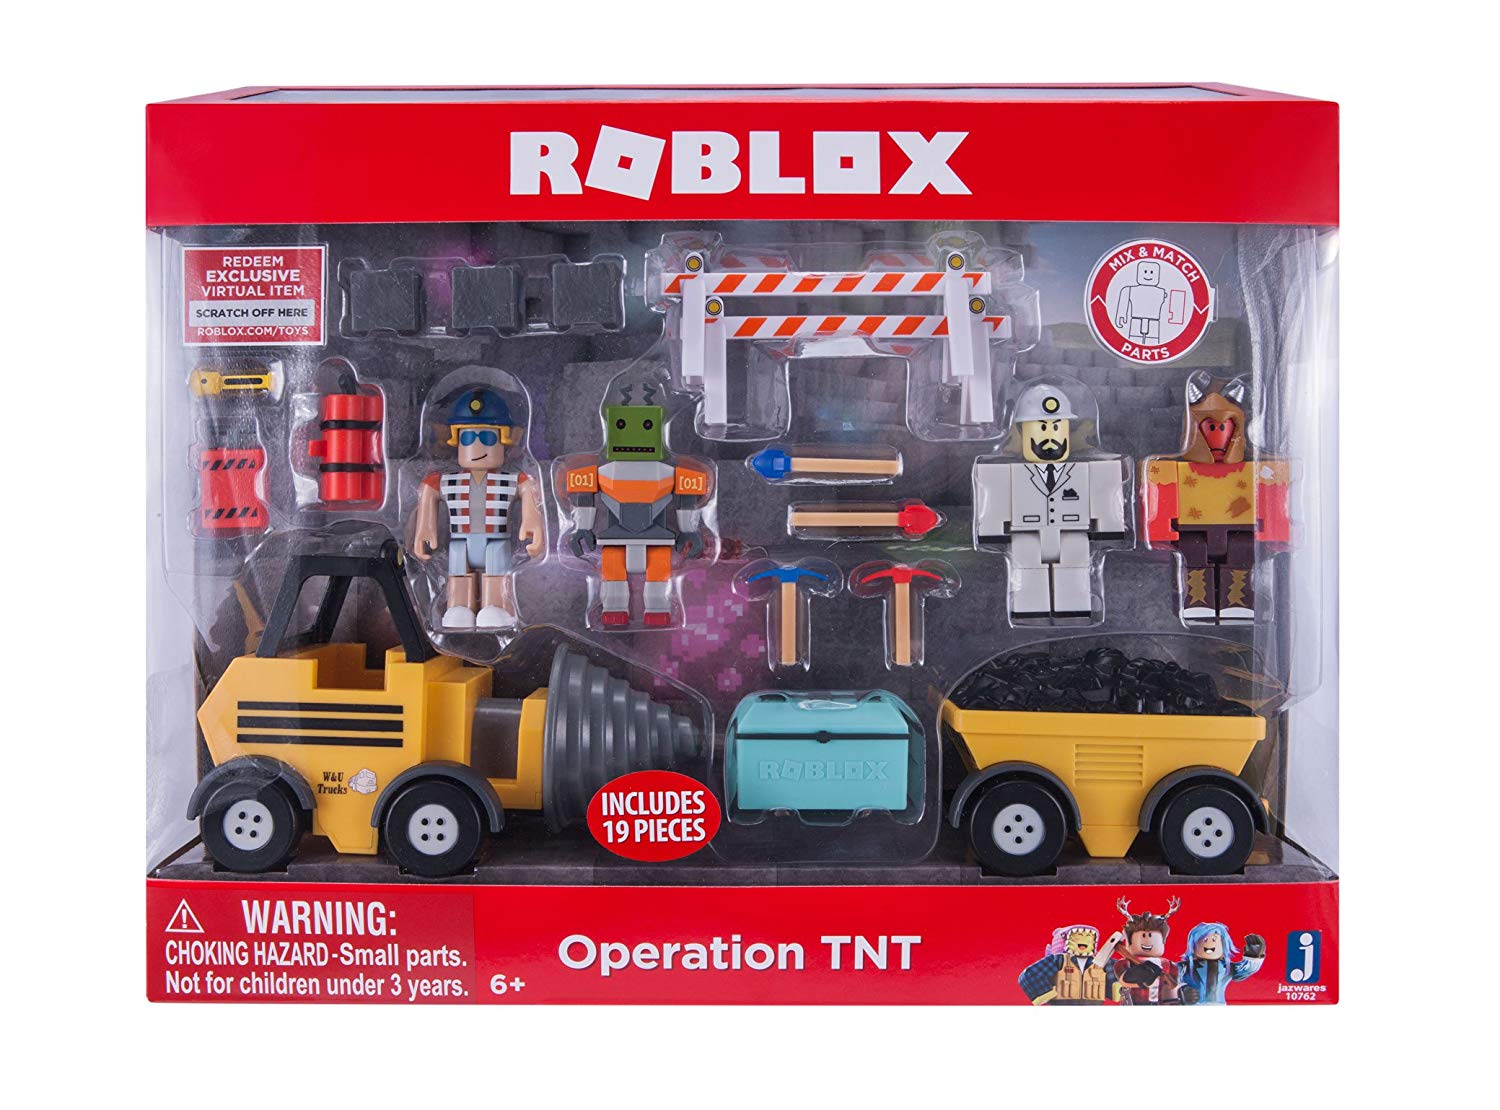 15 Best Roblox Toys The Ultimate List 2021 Heavy Com - www.roblox.com/toys